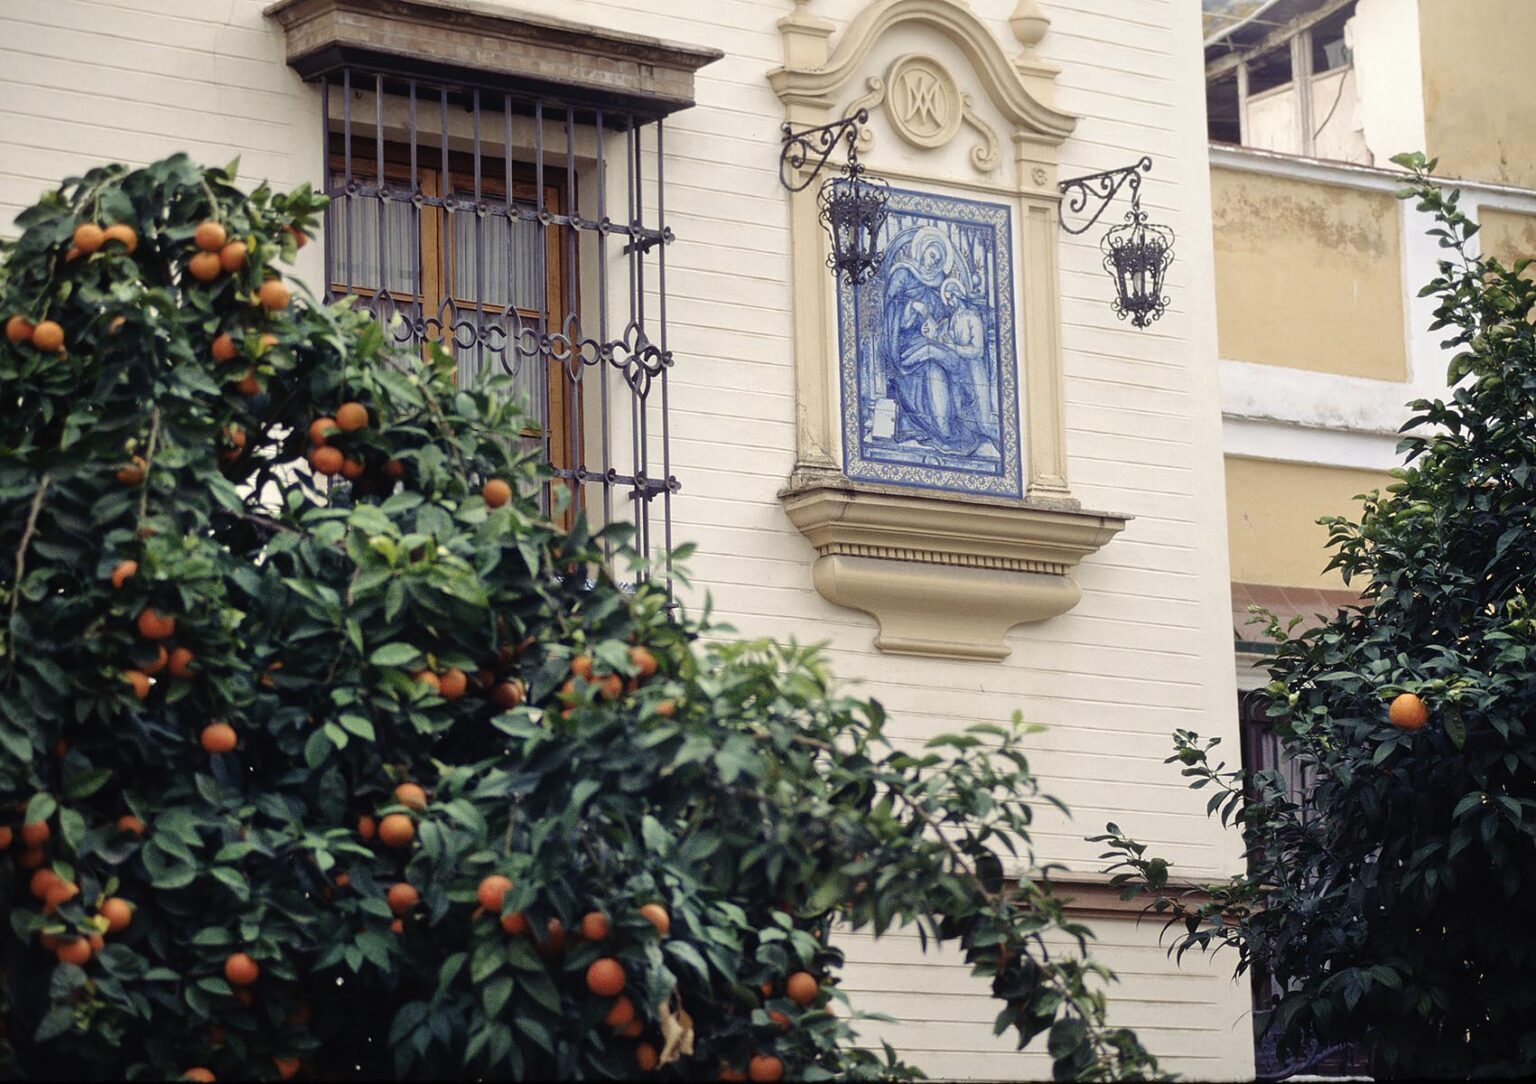 ORANGE TREES are an integral part of  SEVILLA'S ambiance - SPAIN